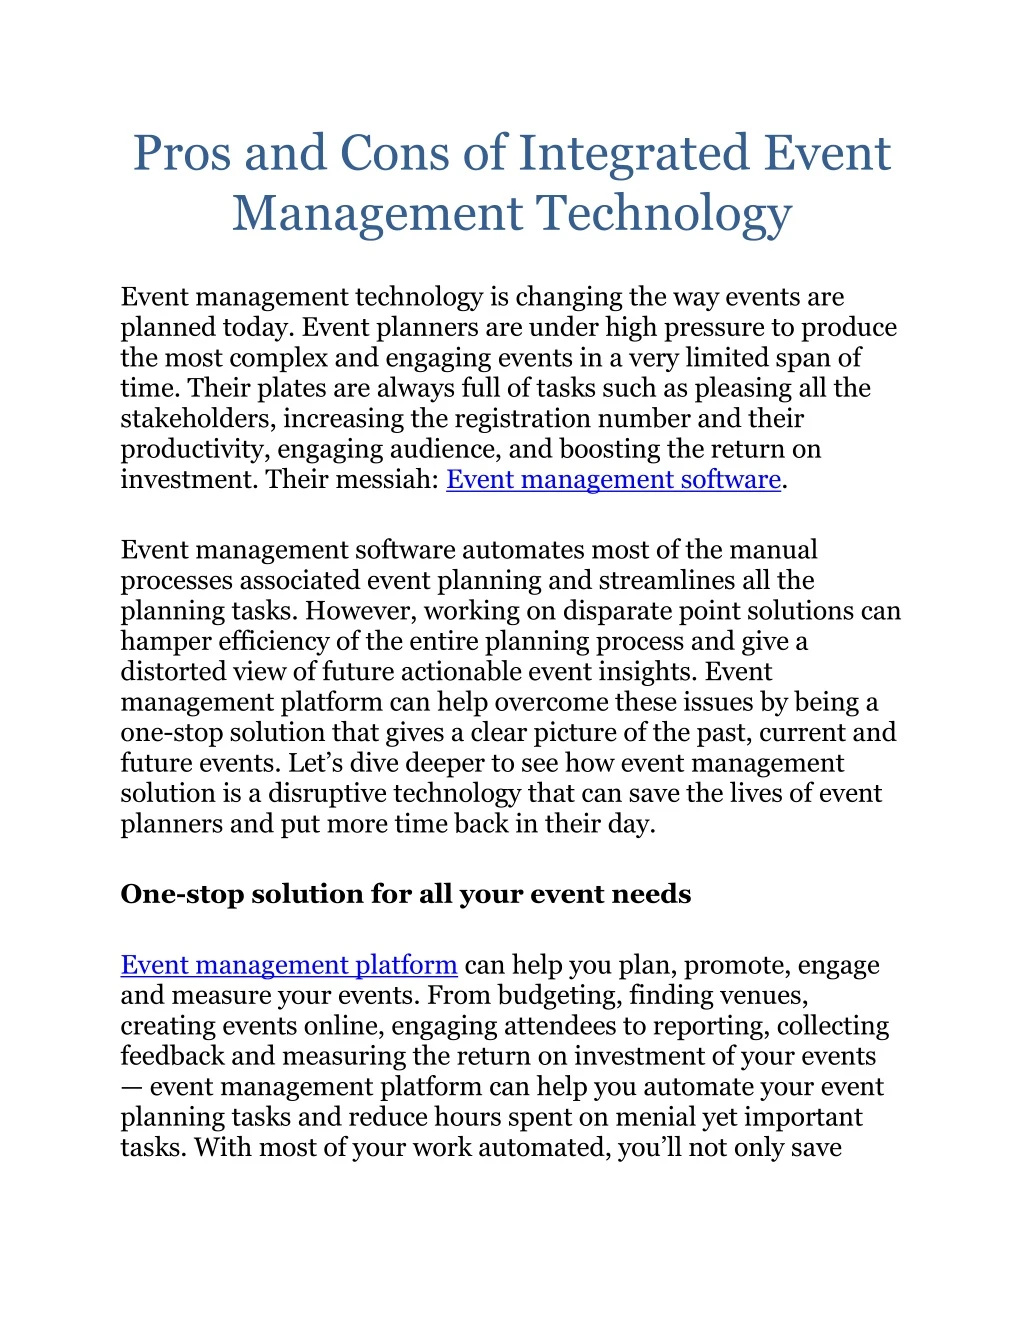 pros and cons of integrated event management